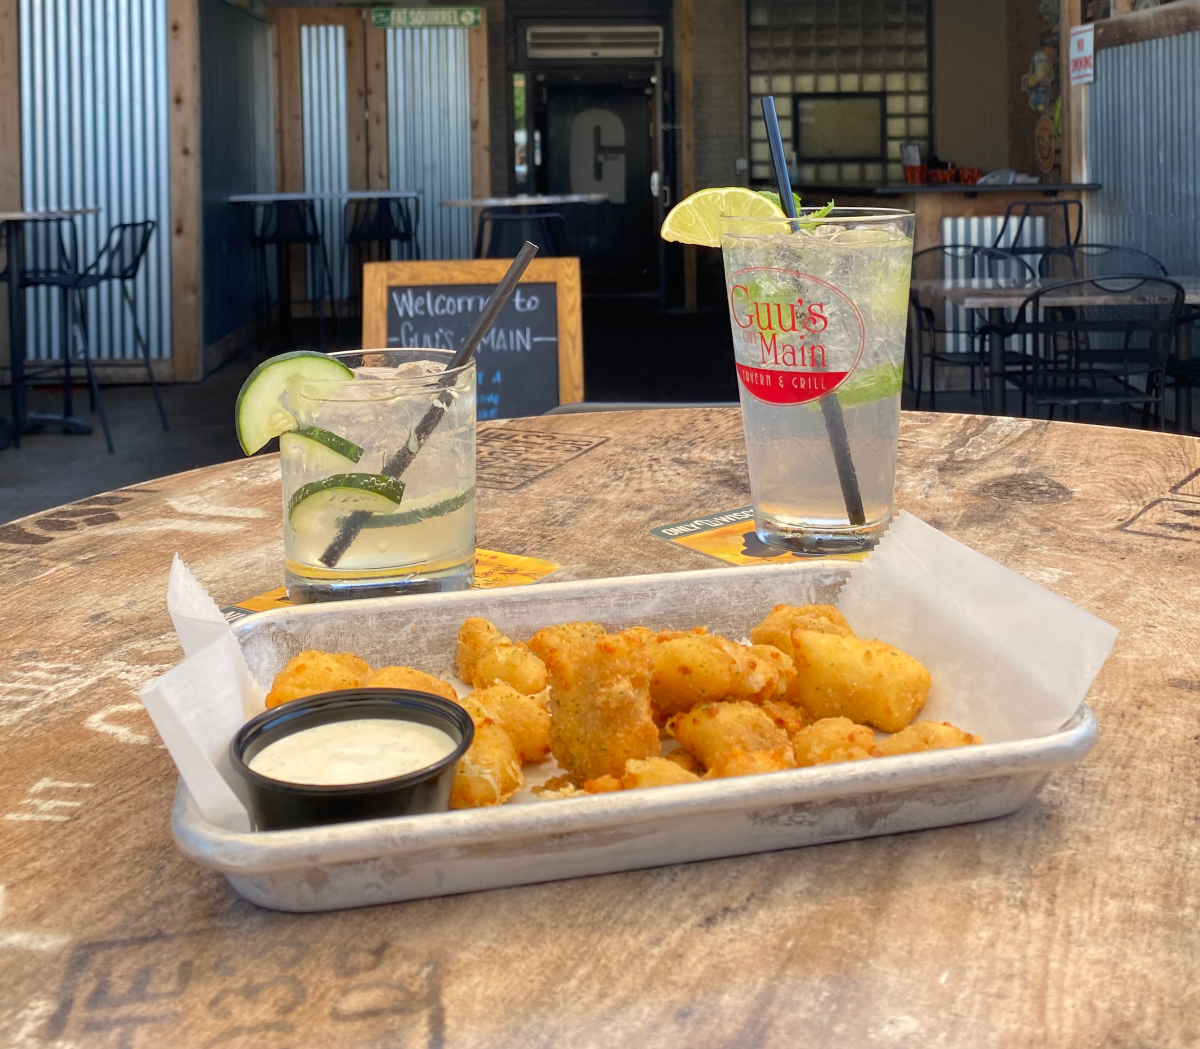 Try the yummy cheese curds at Guu's On Main with a cocktail to wash it down.